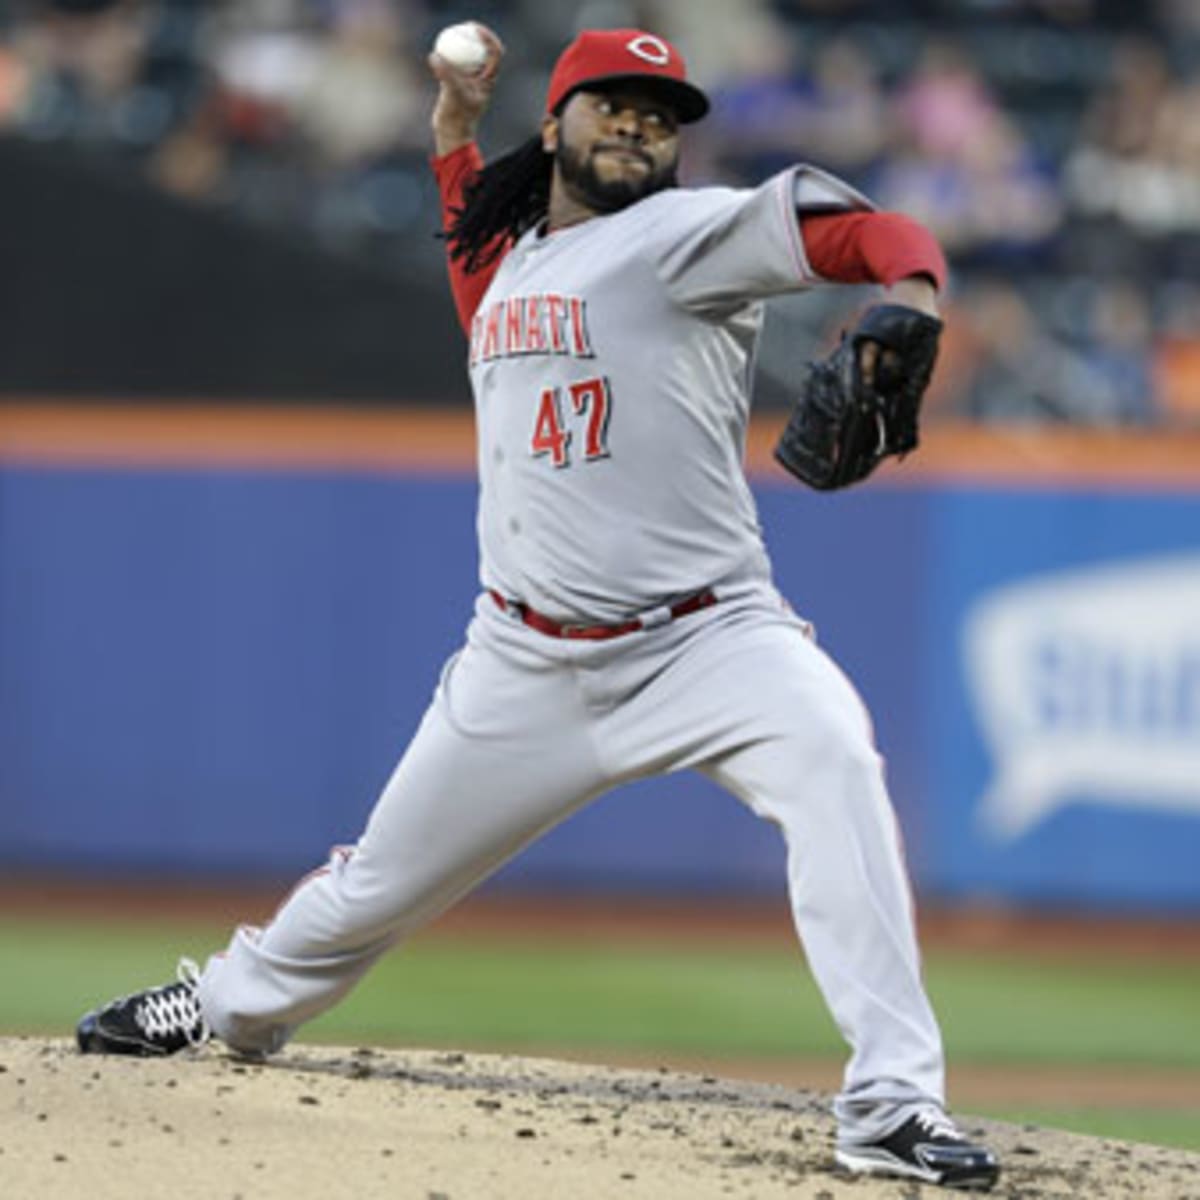 Johnny Cueto said he was 'really close' to Reds' return